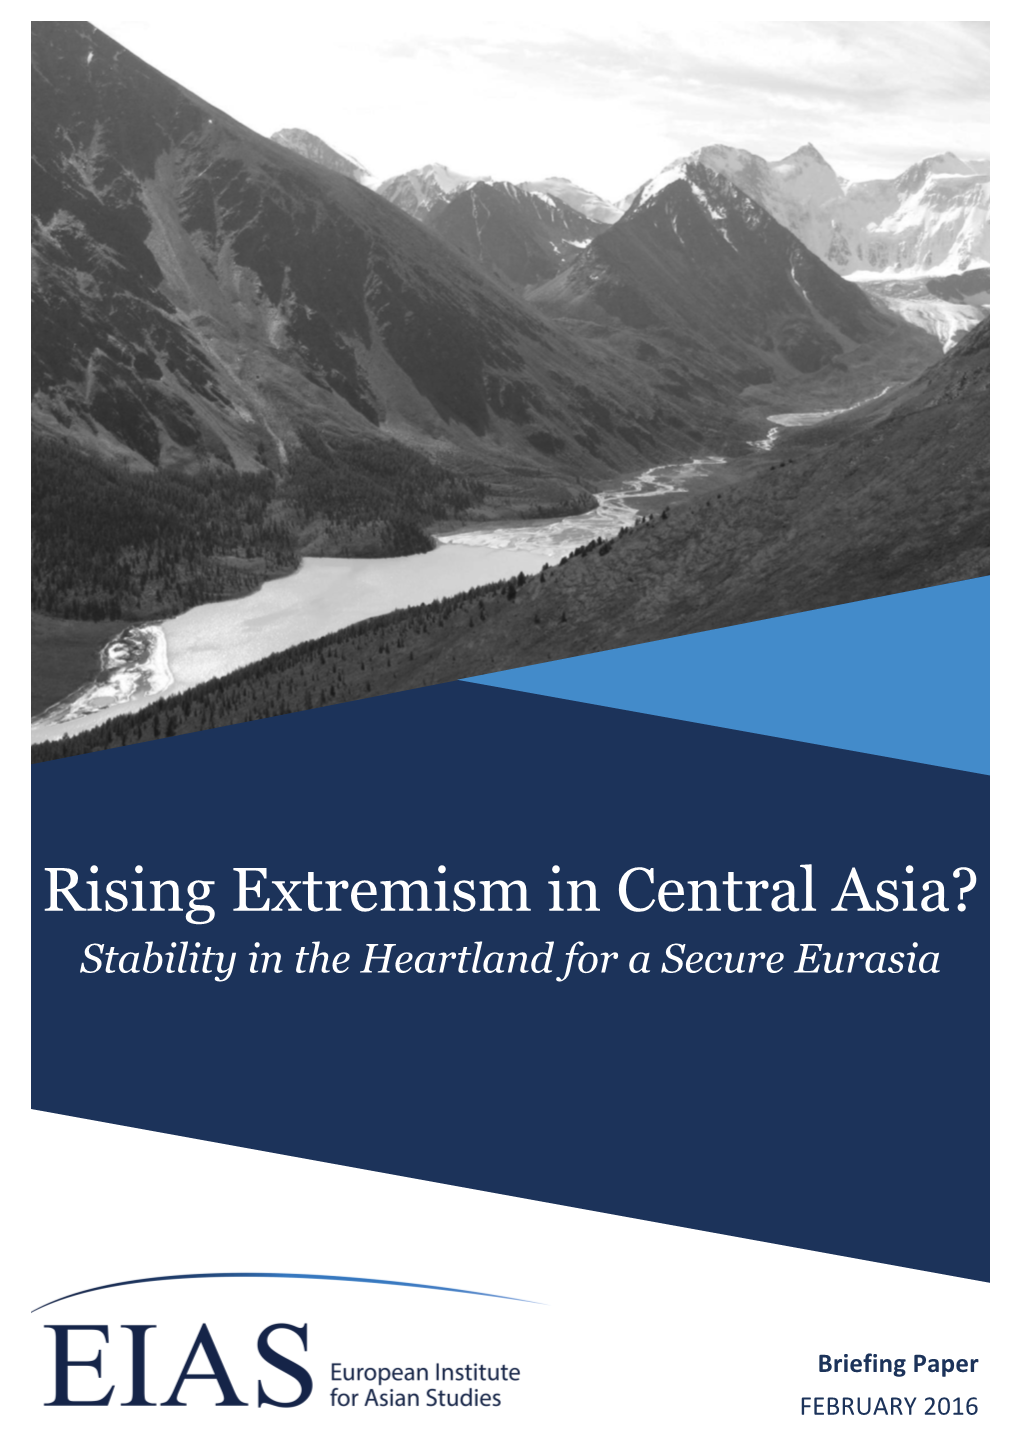 Rising Extremism in Central Asia? Stability in the Heartland for a Secure Eurasia